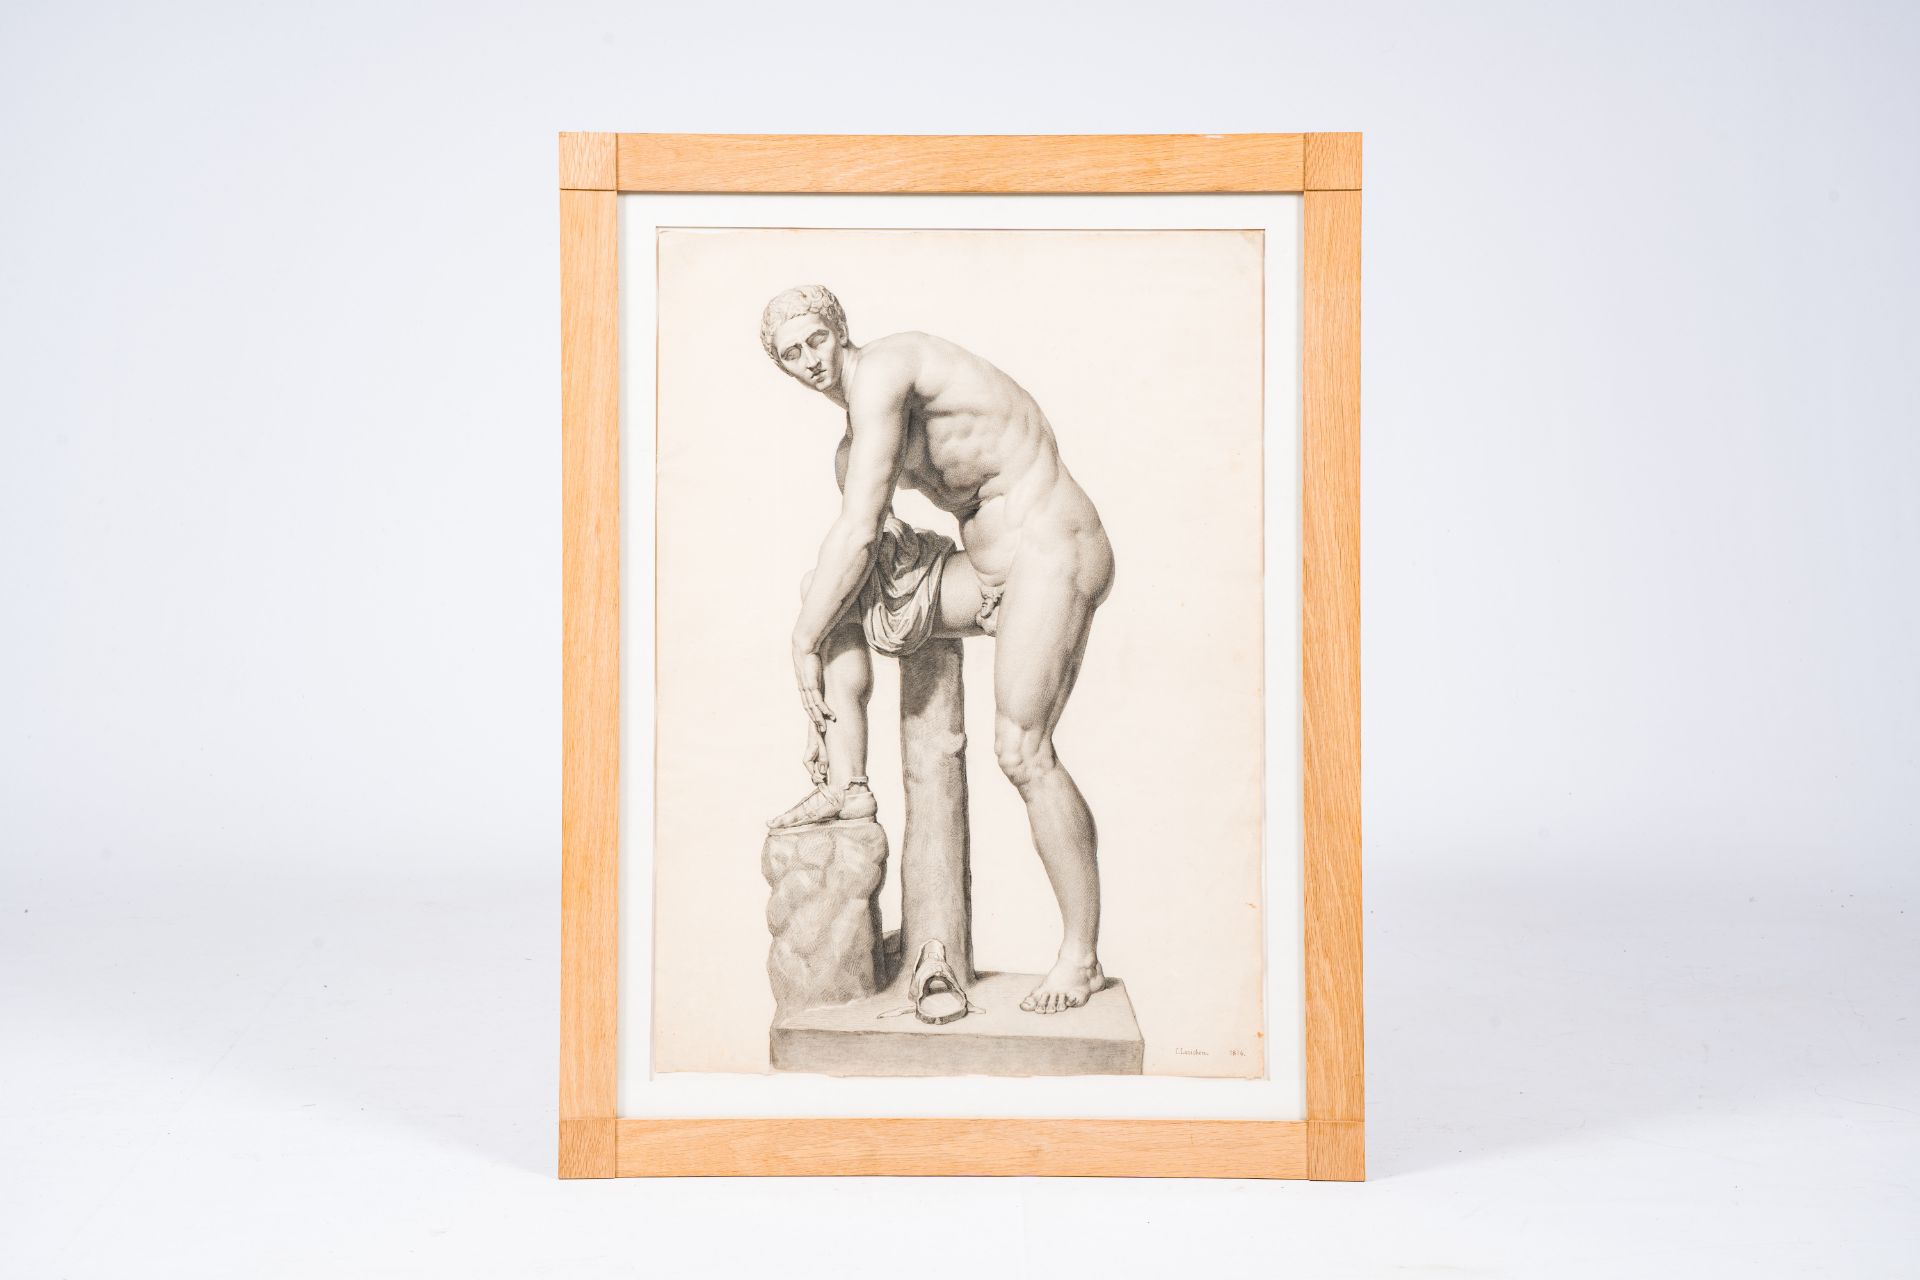 Constant Lorichon(1800-1856): Hermes fastening his sandal, pencil and charcoal on paper, dated 1816 - Image 2 of 5